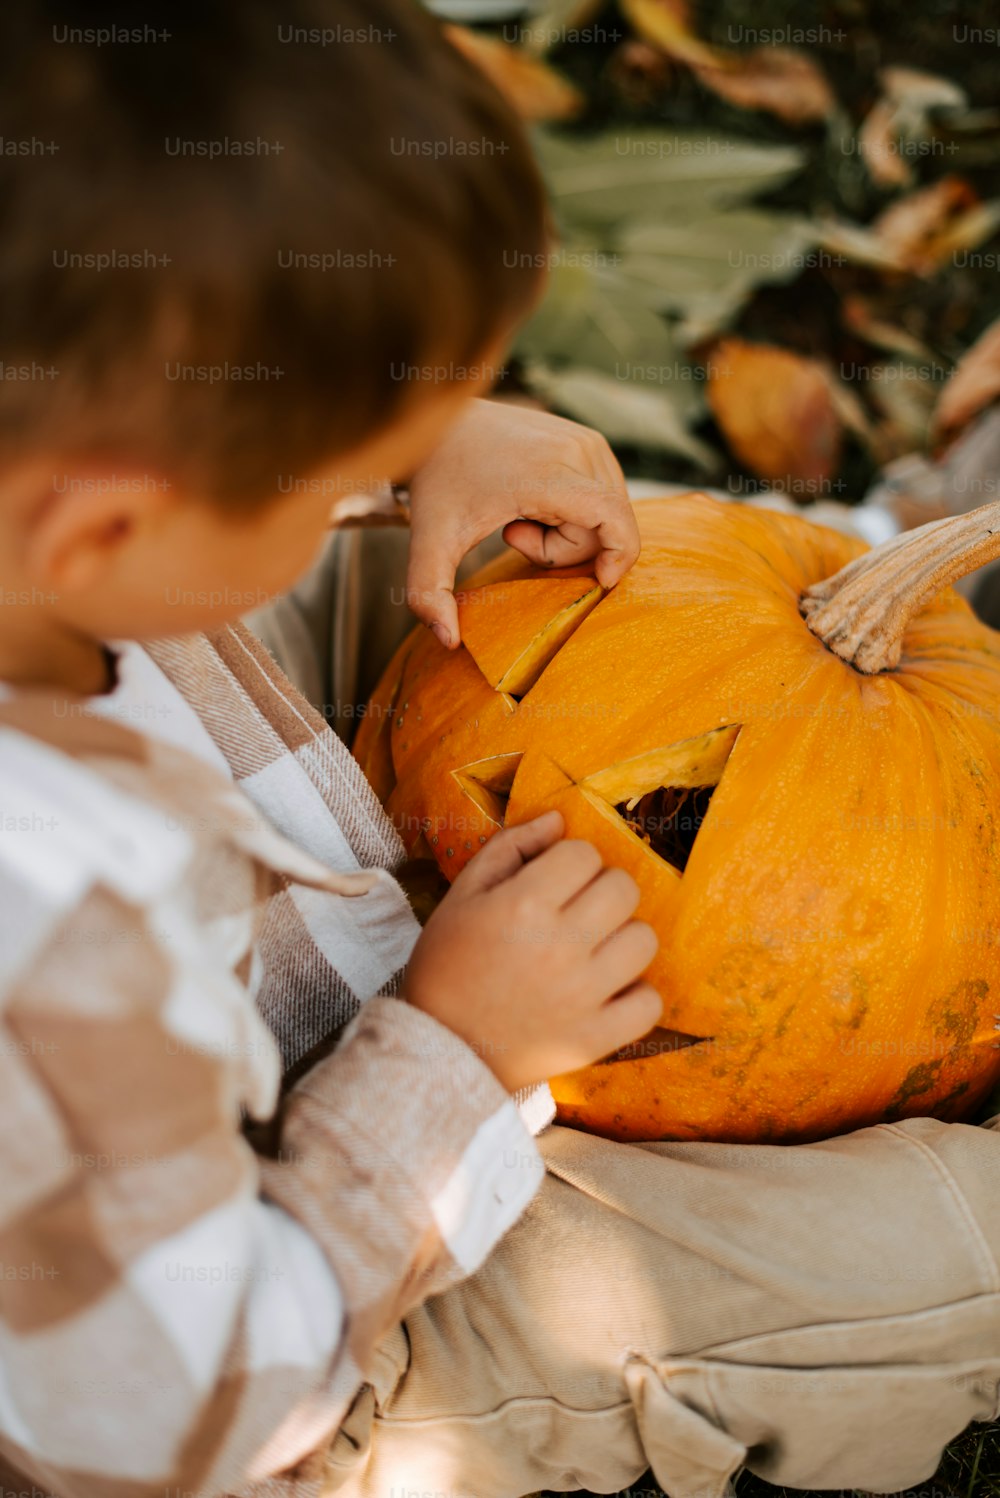 a young boy carving a pumpkin for halloween